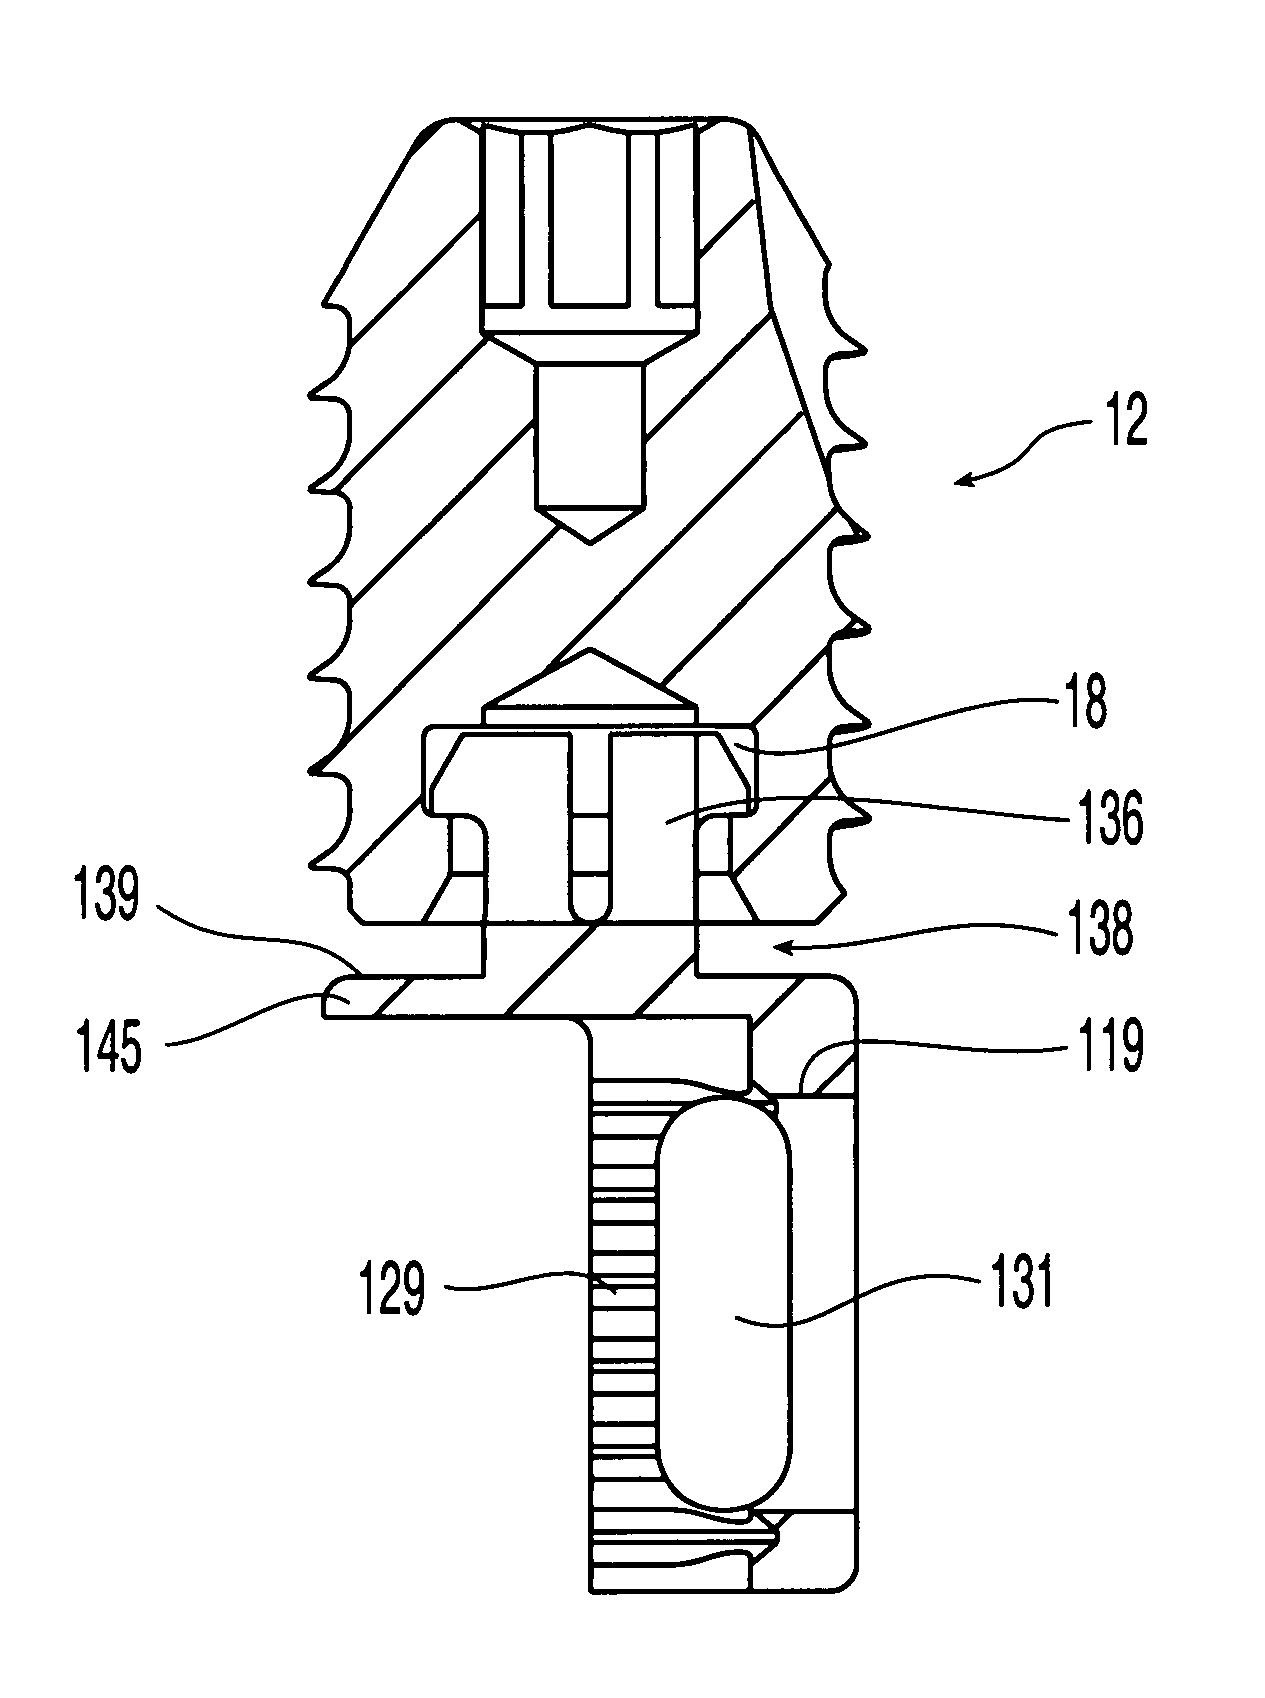 Graft fixation system and method